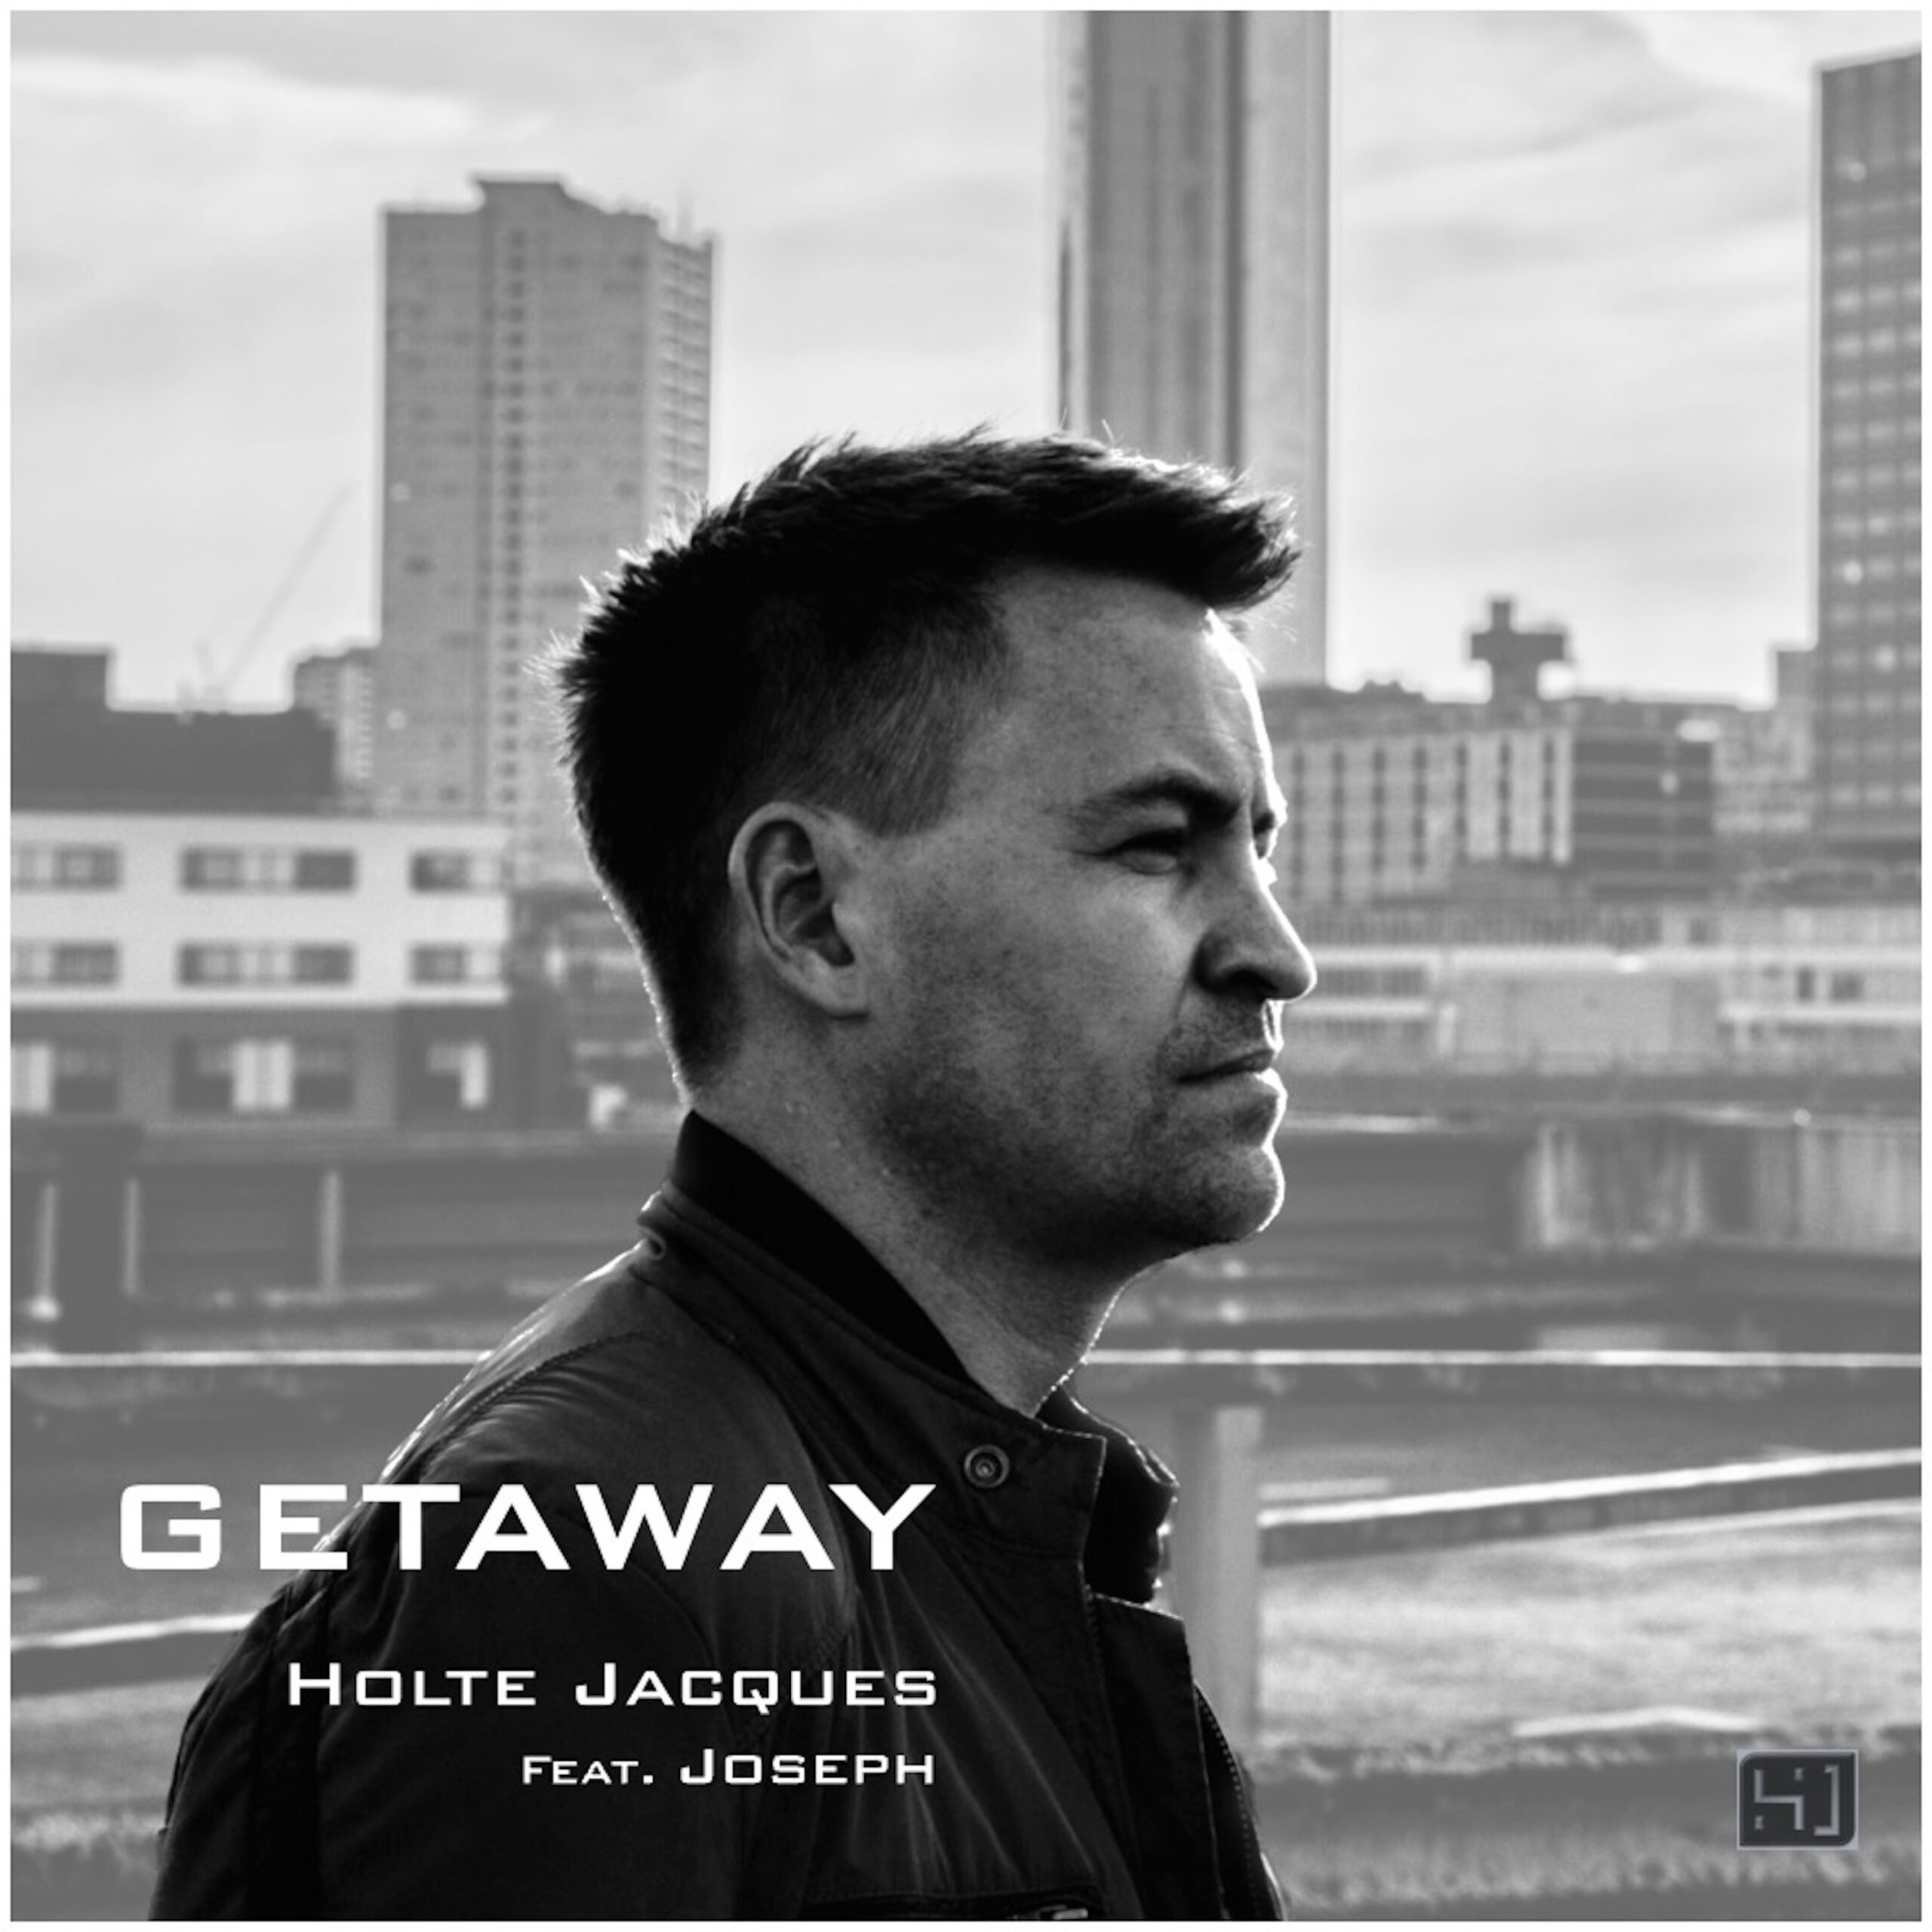 LISTEN: “Getaway” by Holte Jacques